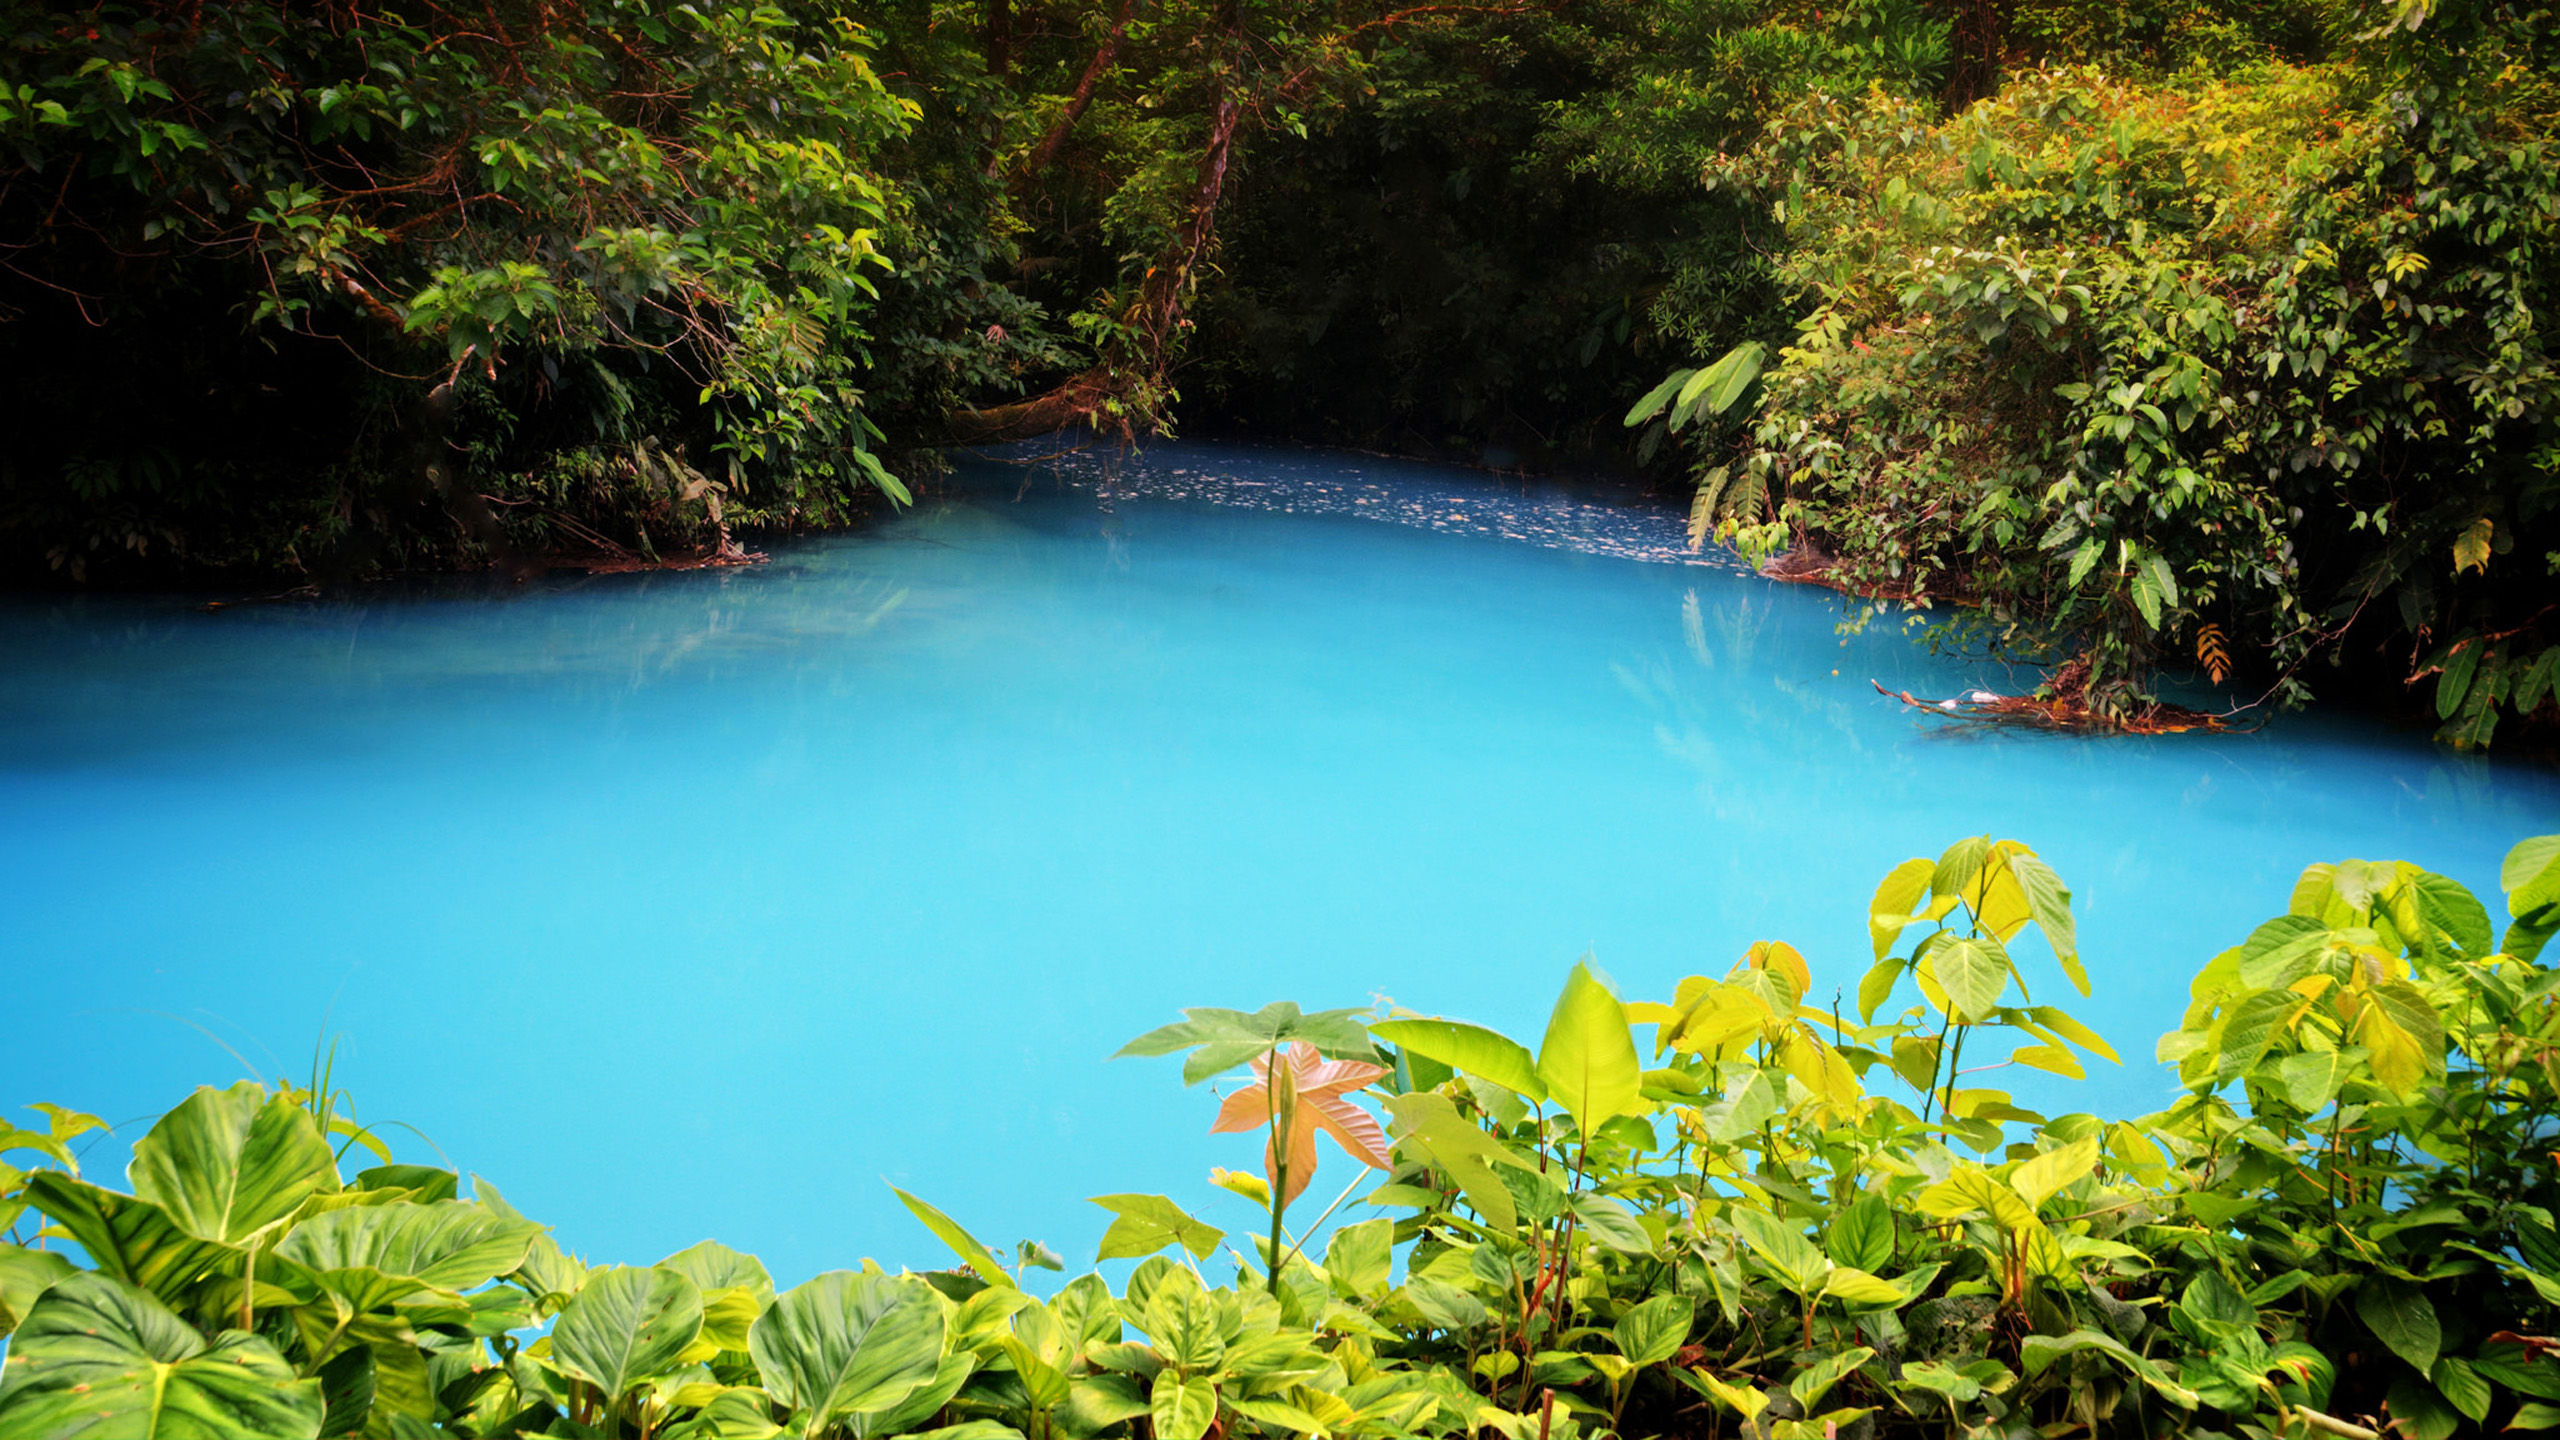 Celeste River With Turquoise Blue Water Is A River In Tenorio Volcano